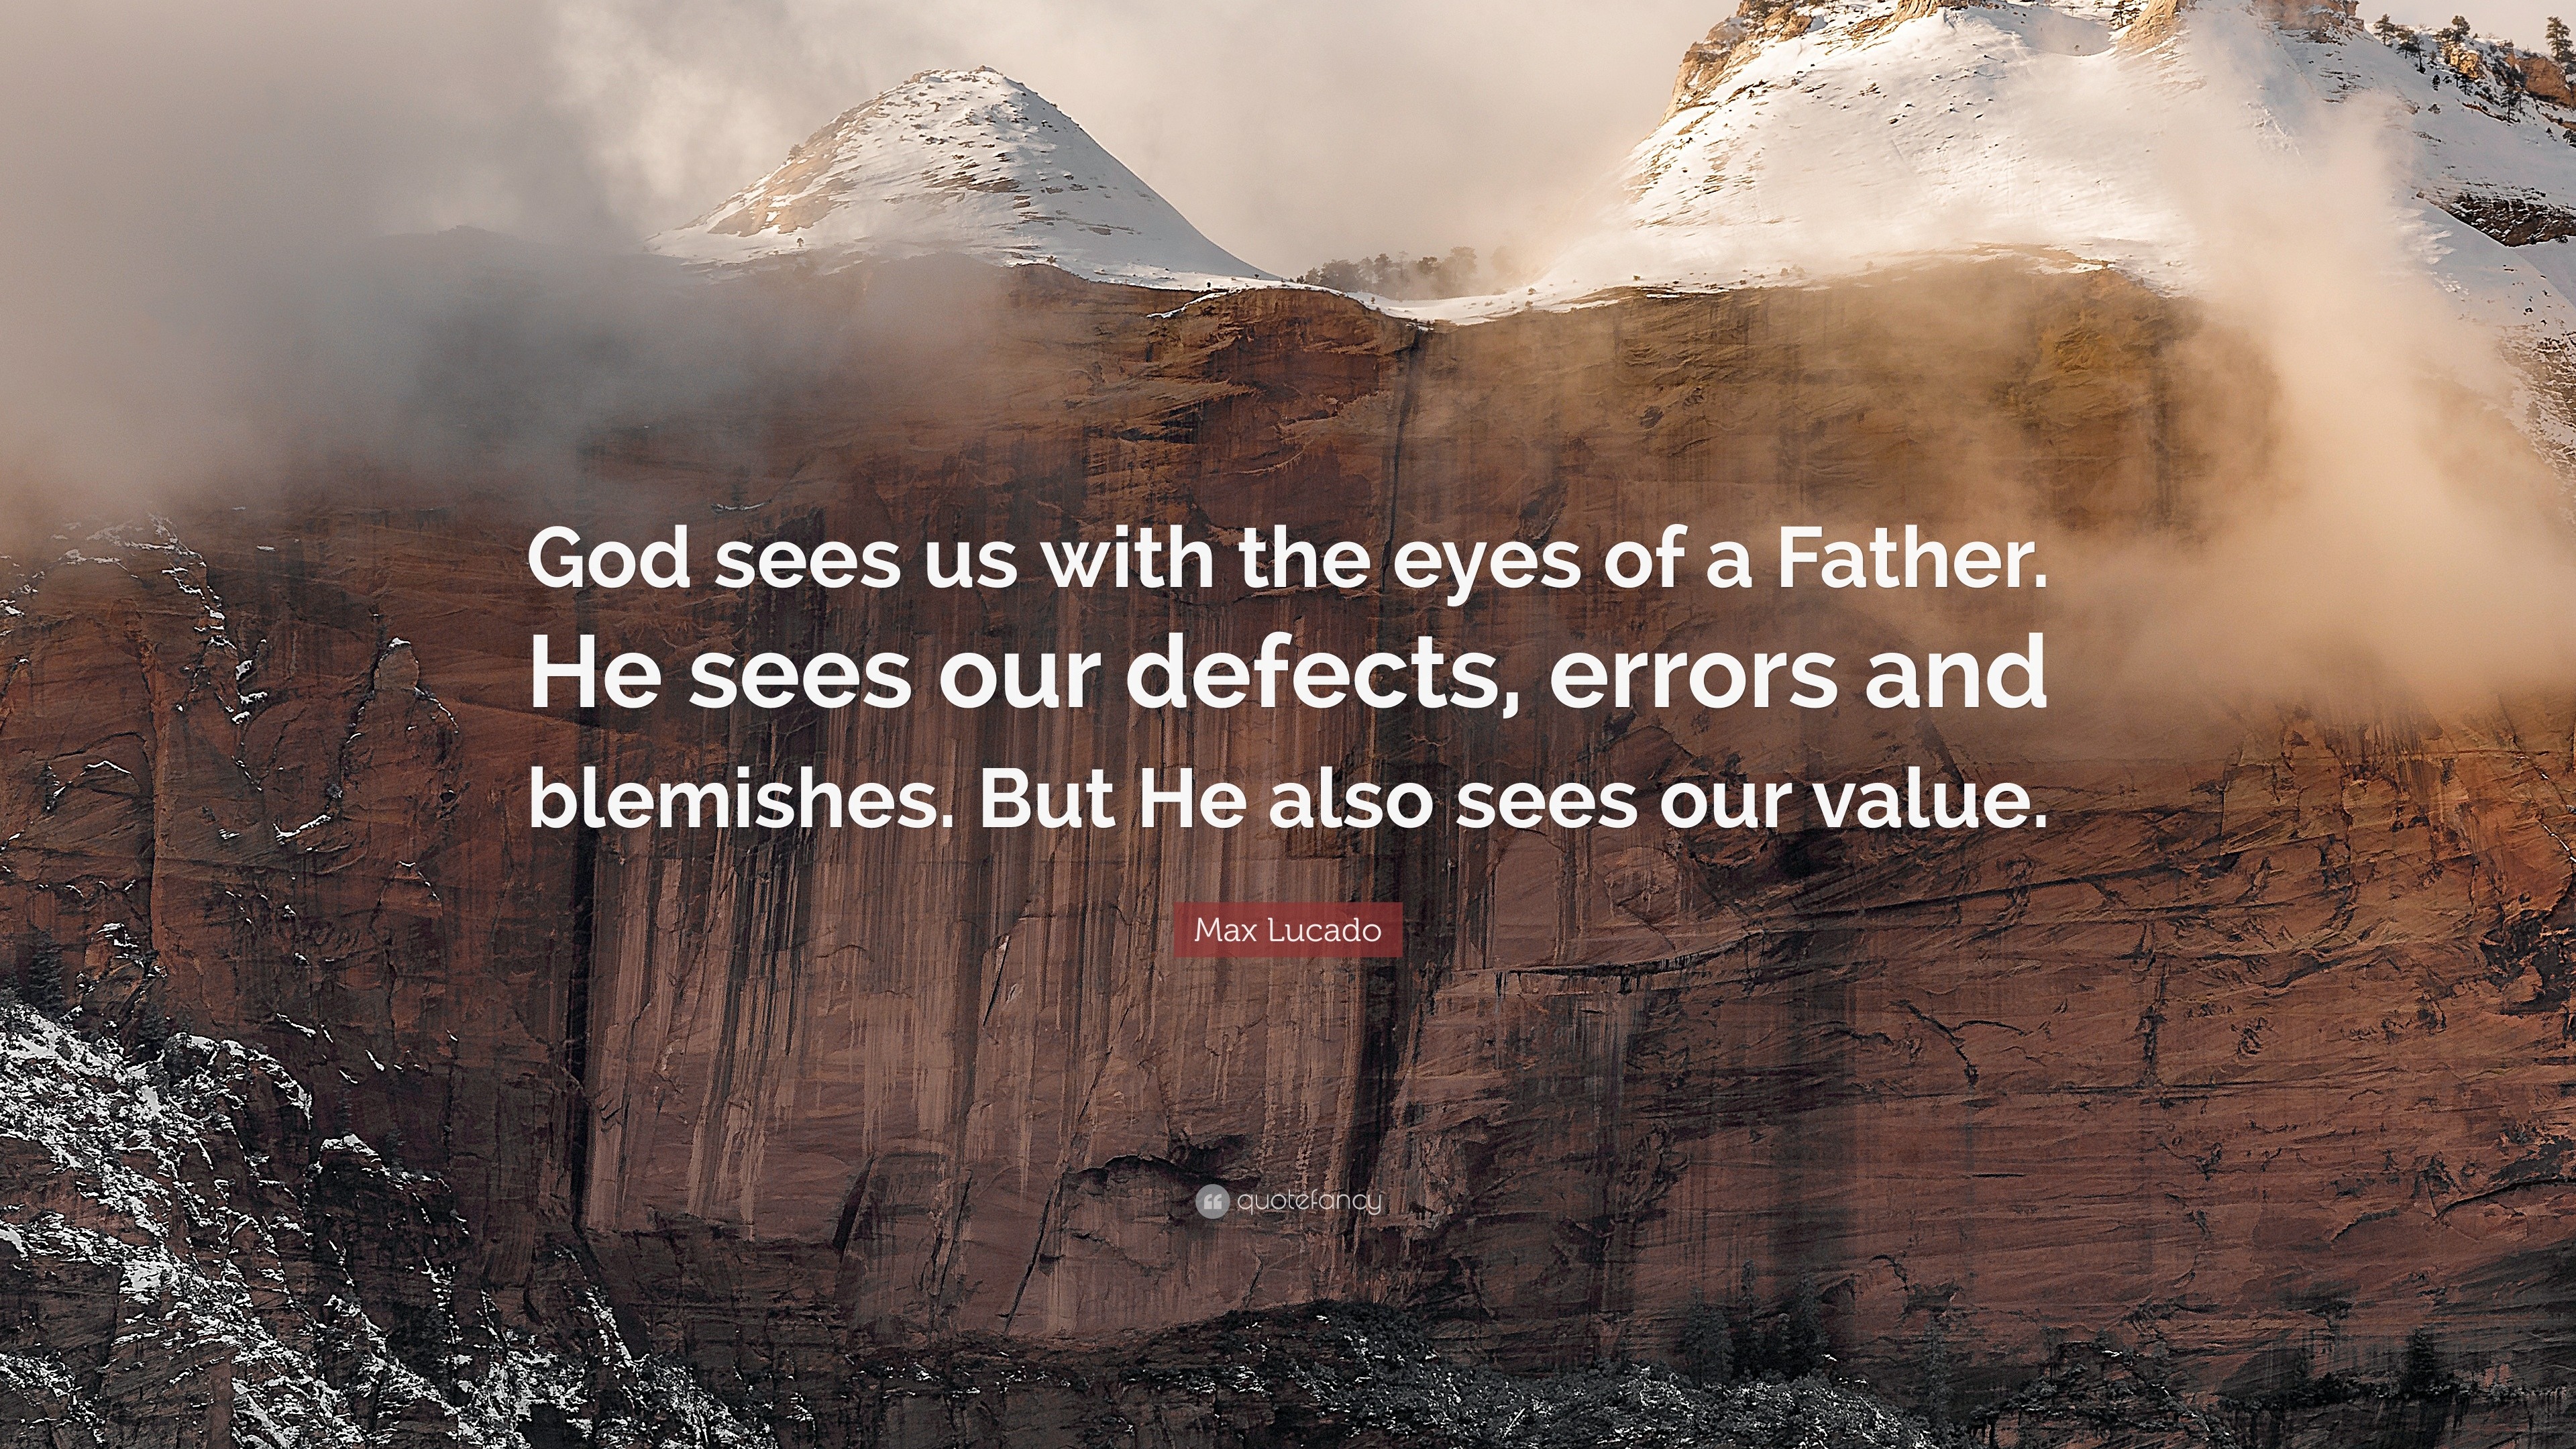 Max Lucado Quote: “God sees us with the eyes of a Father. He sees our